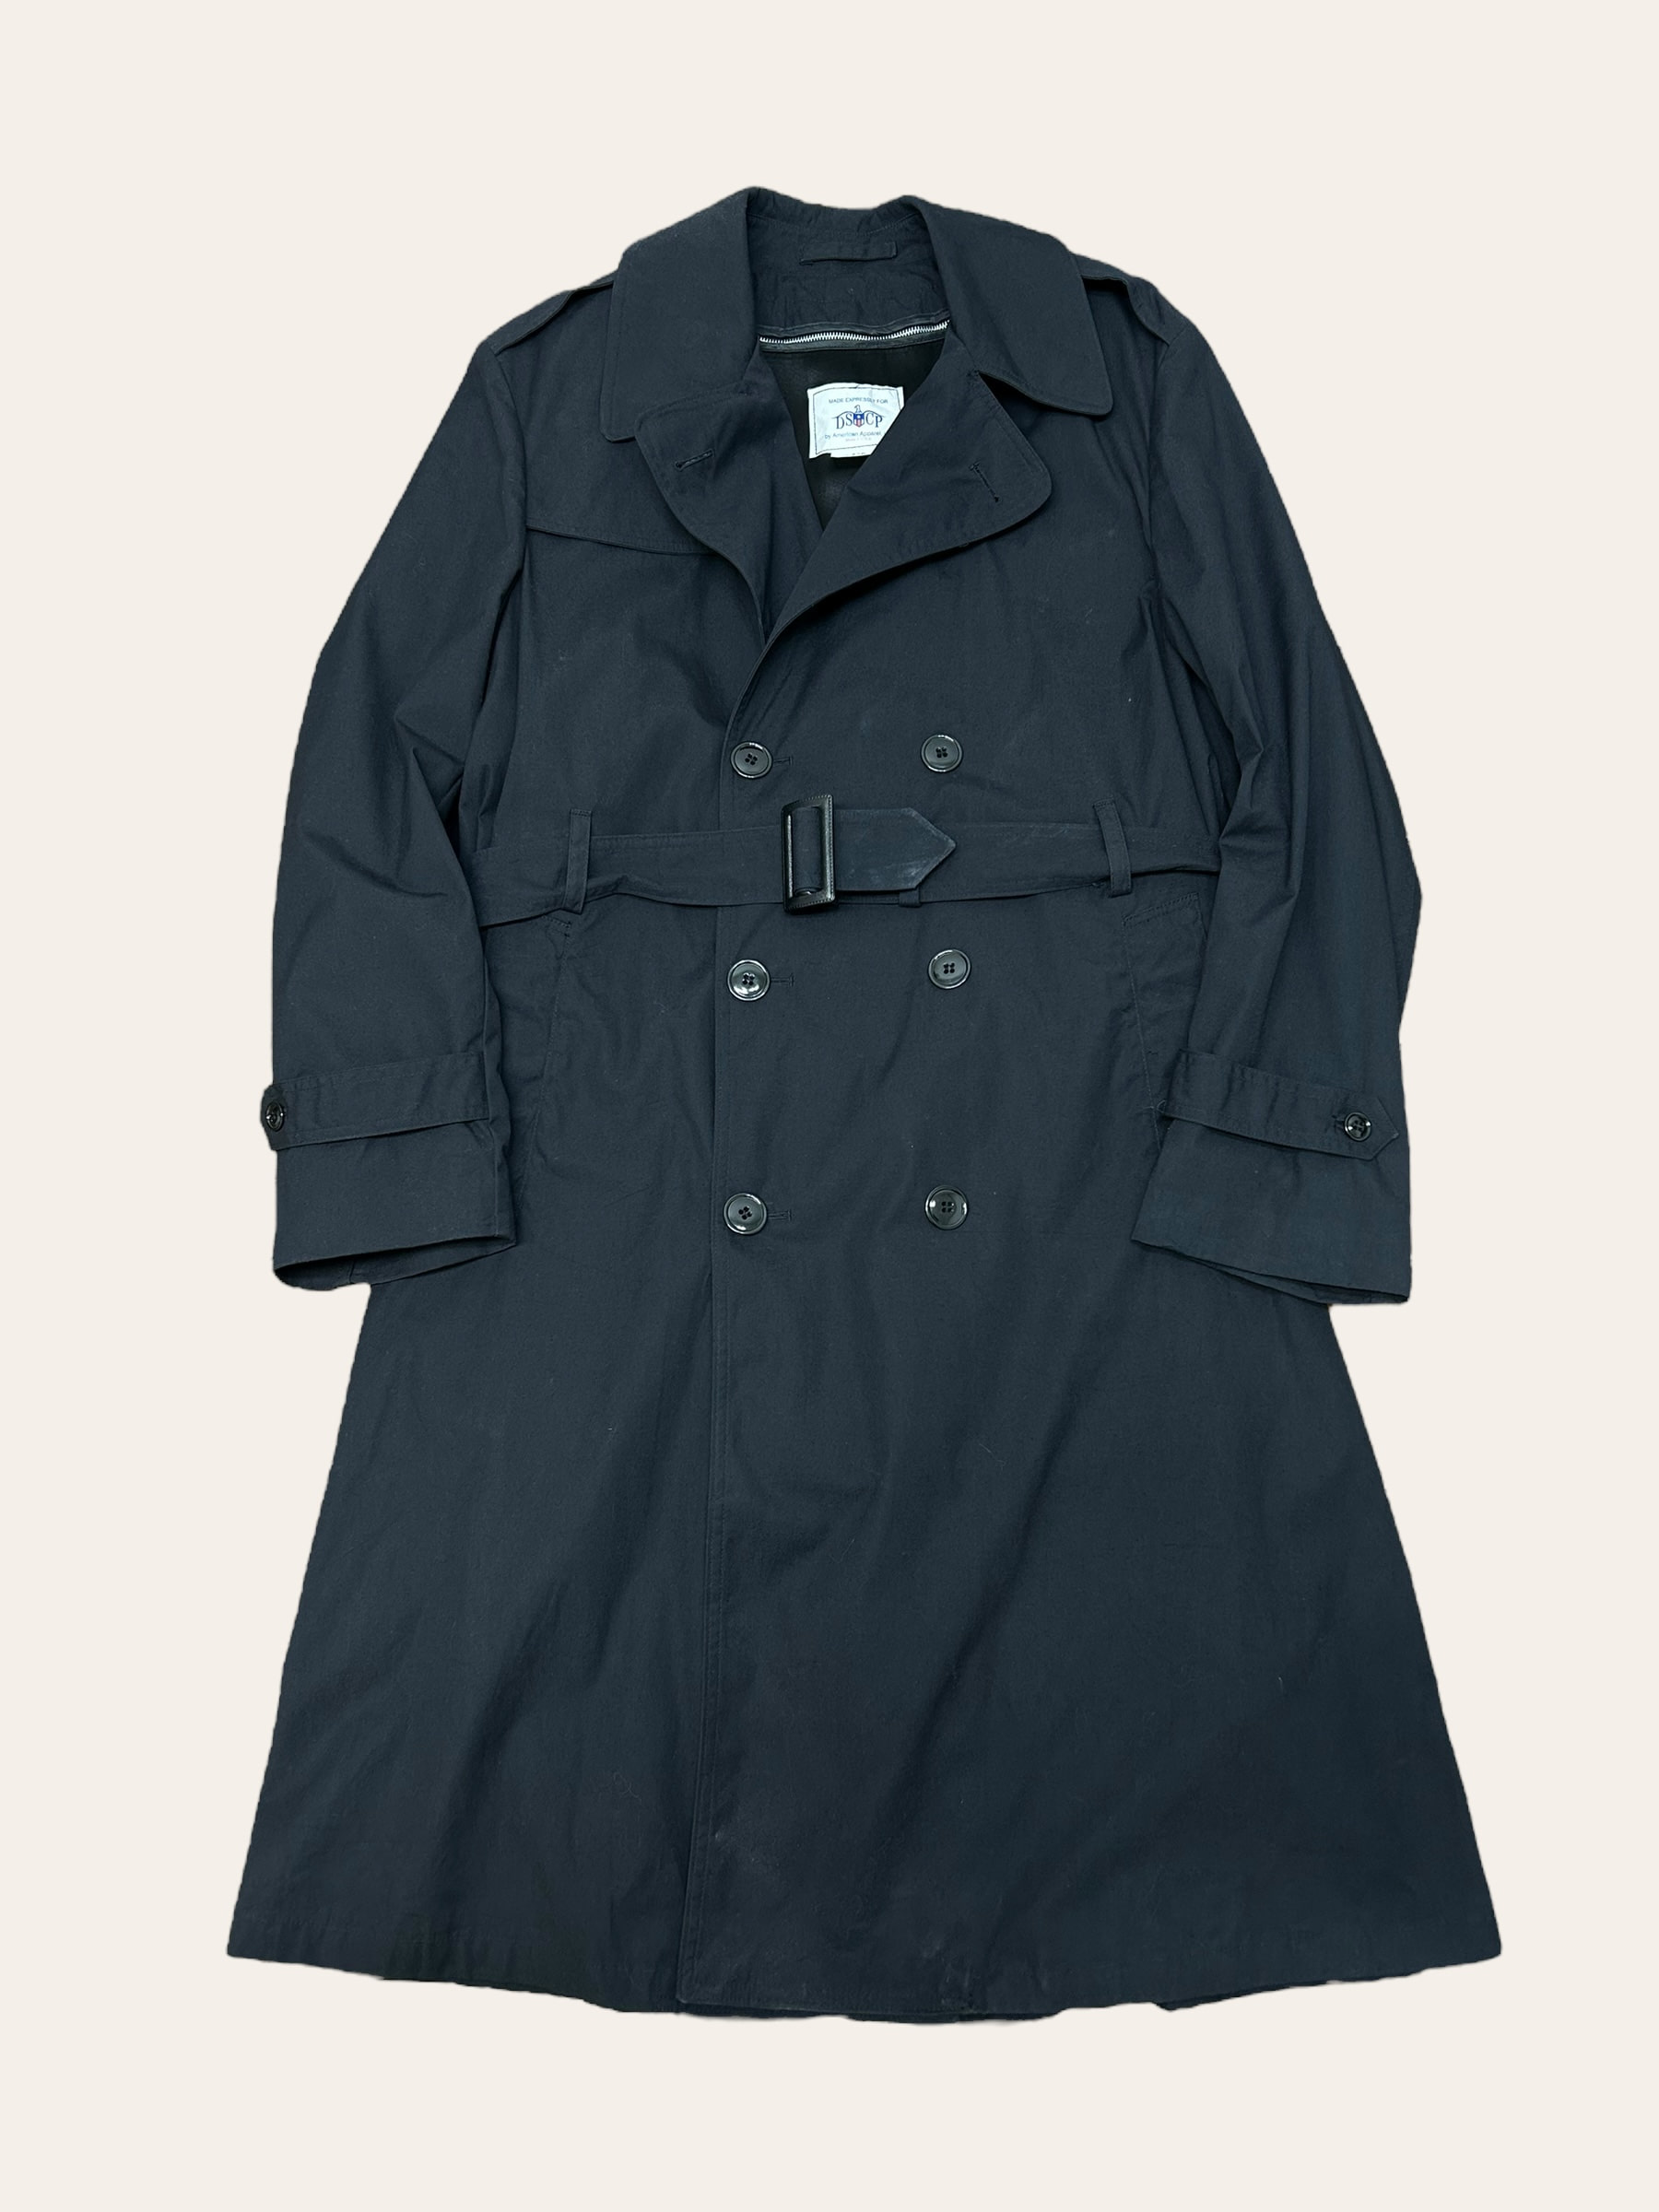 DSCP U.A.F navy all weather trench coat 42R